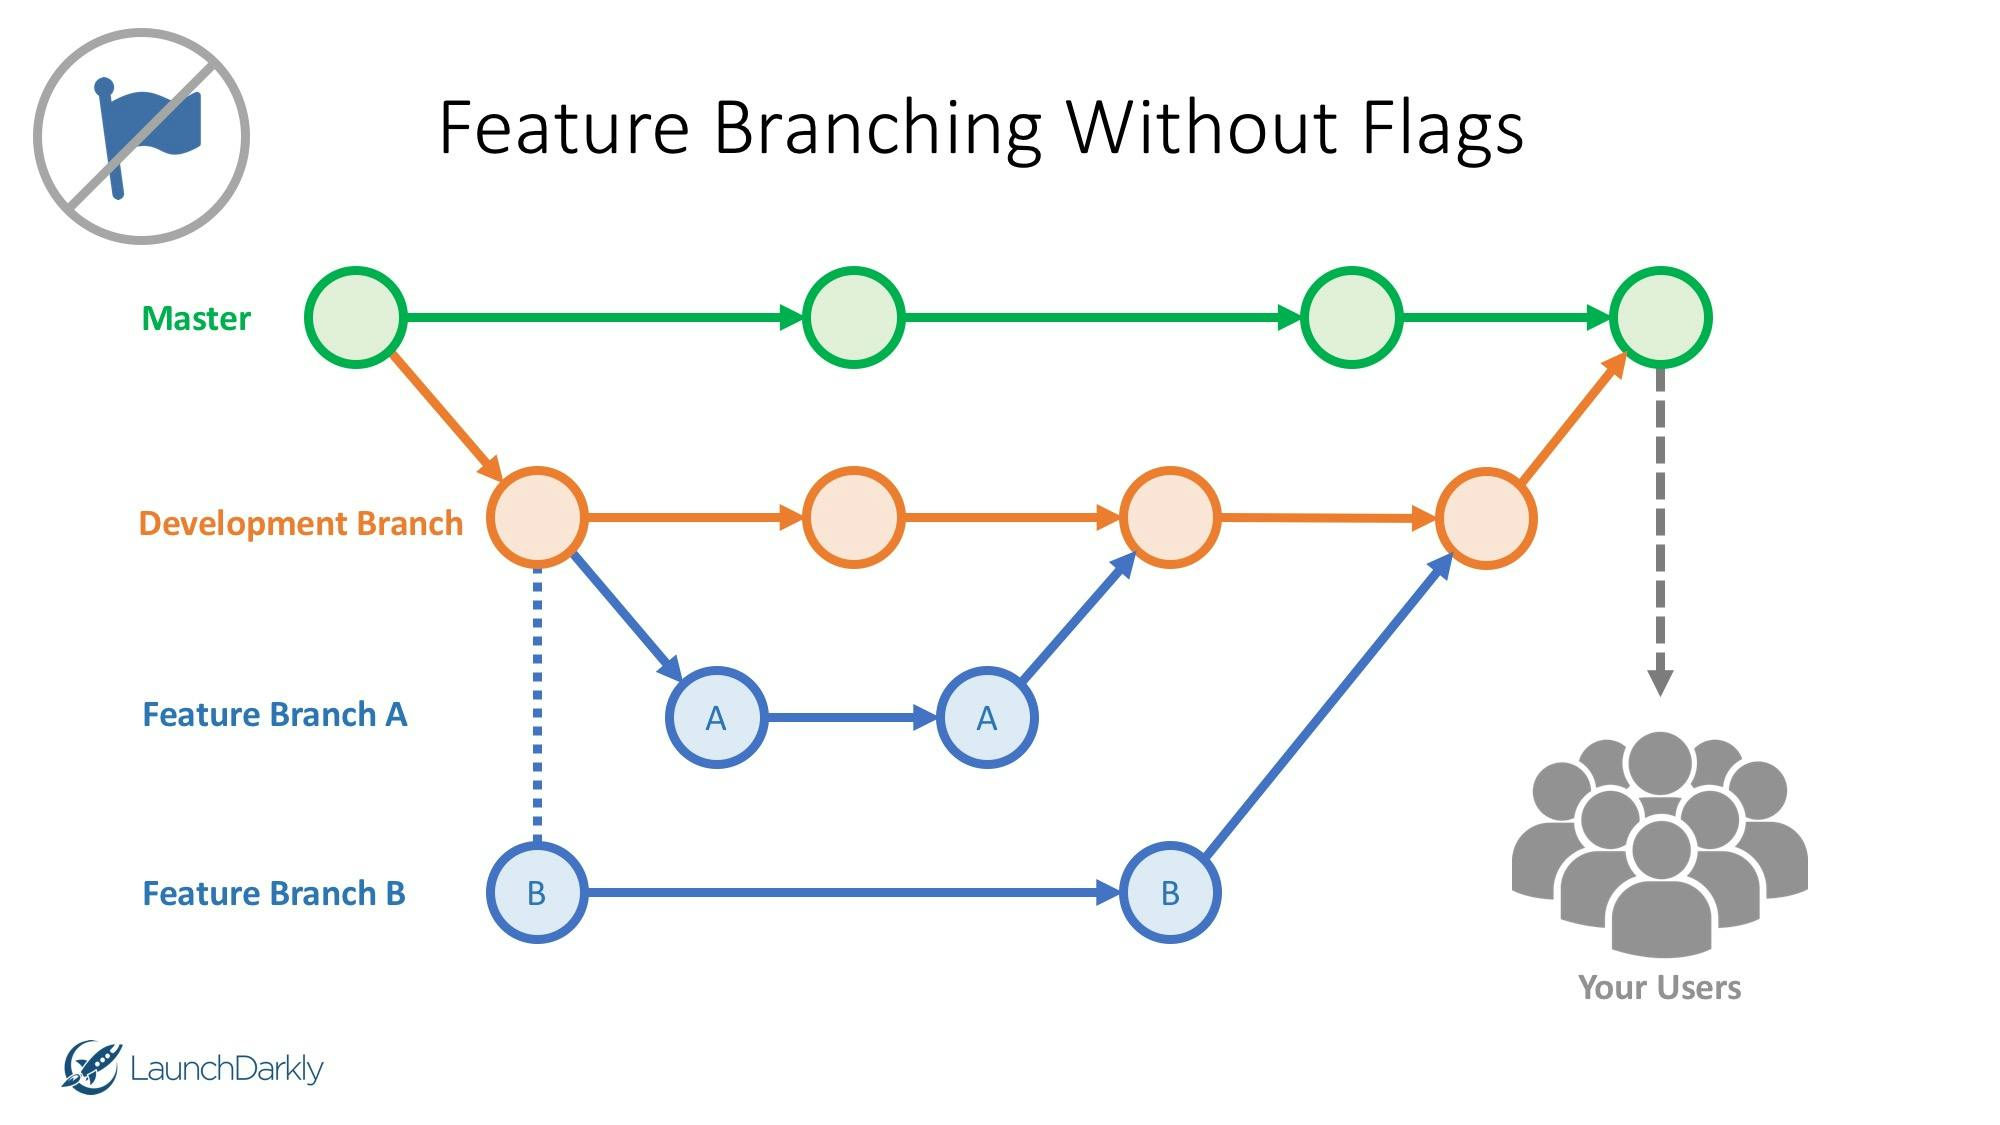 Feature branching without flags